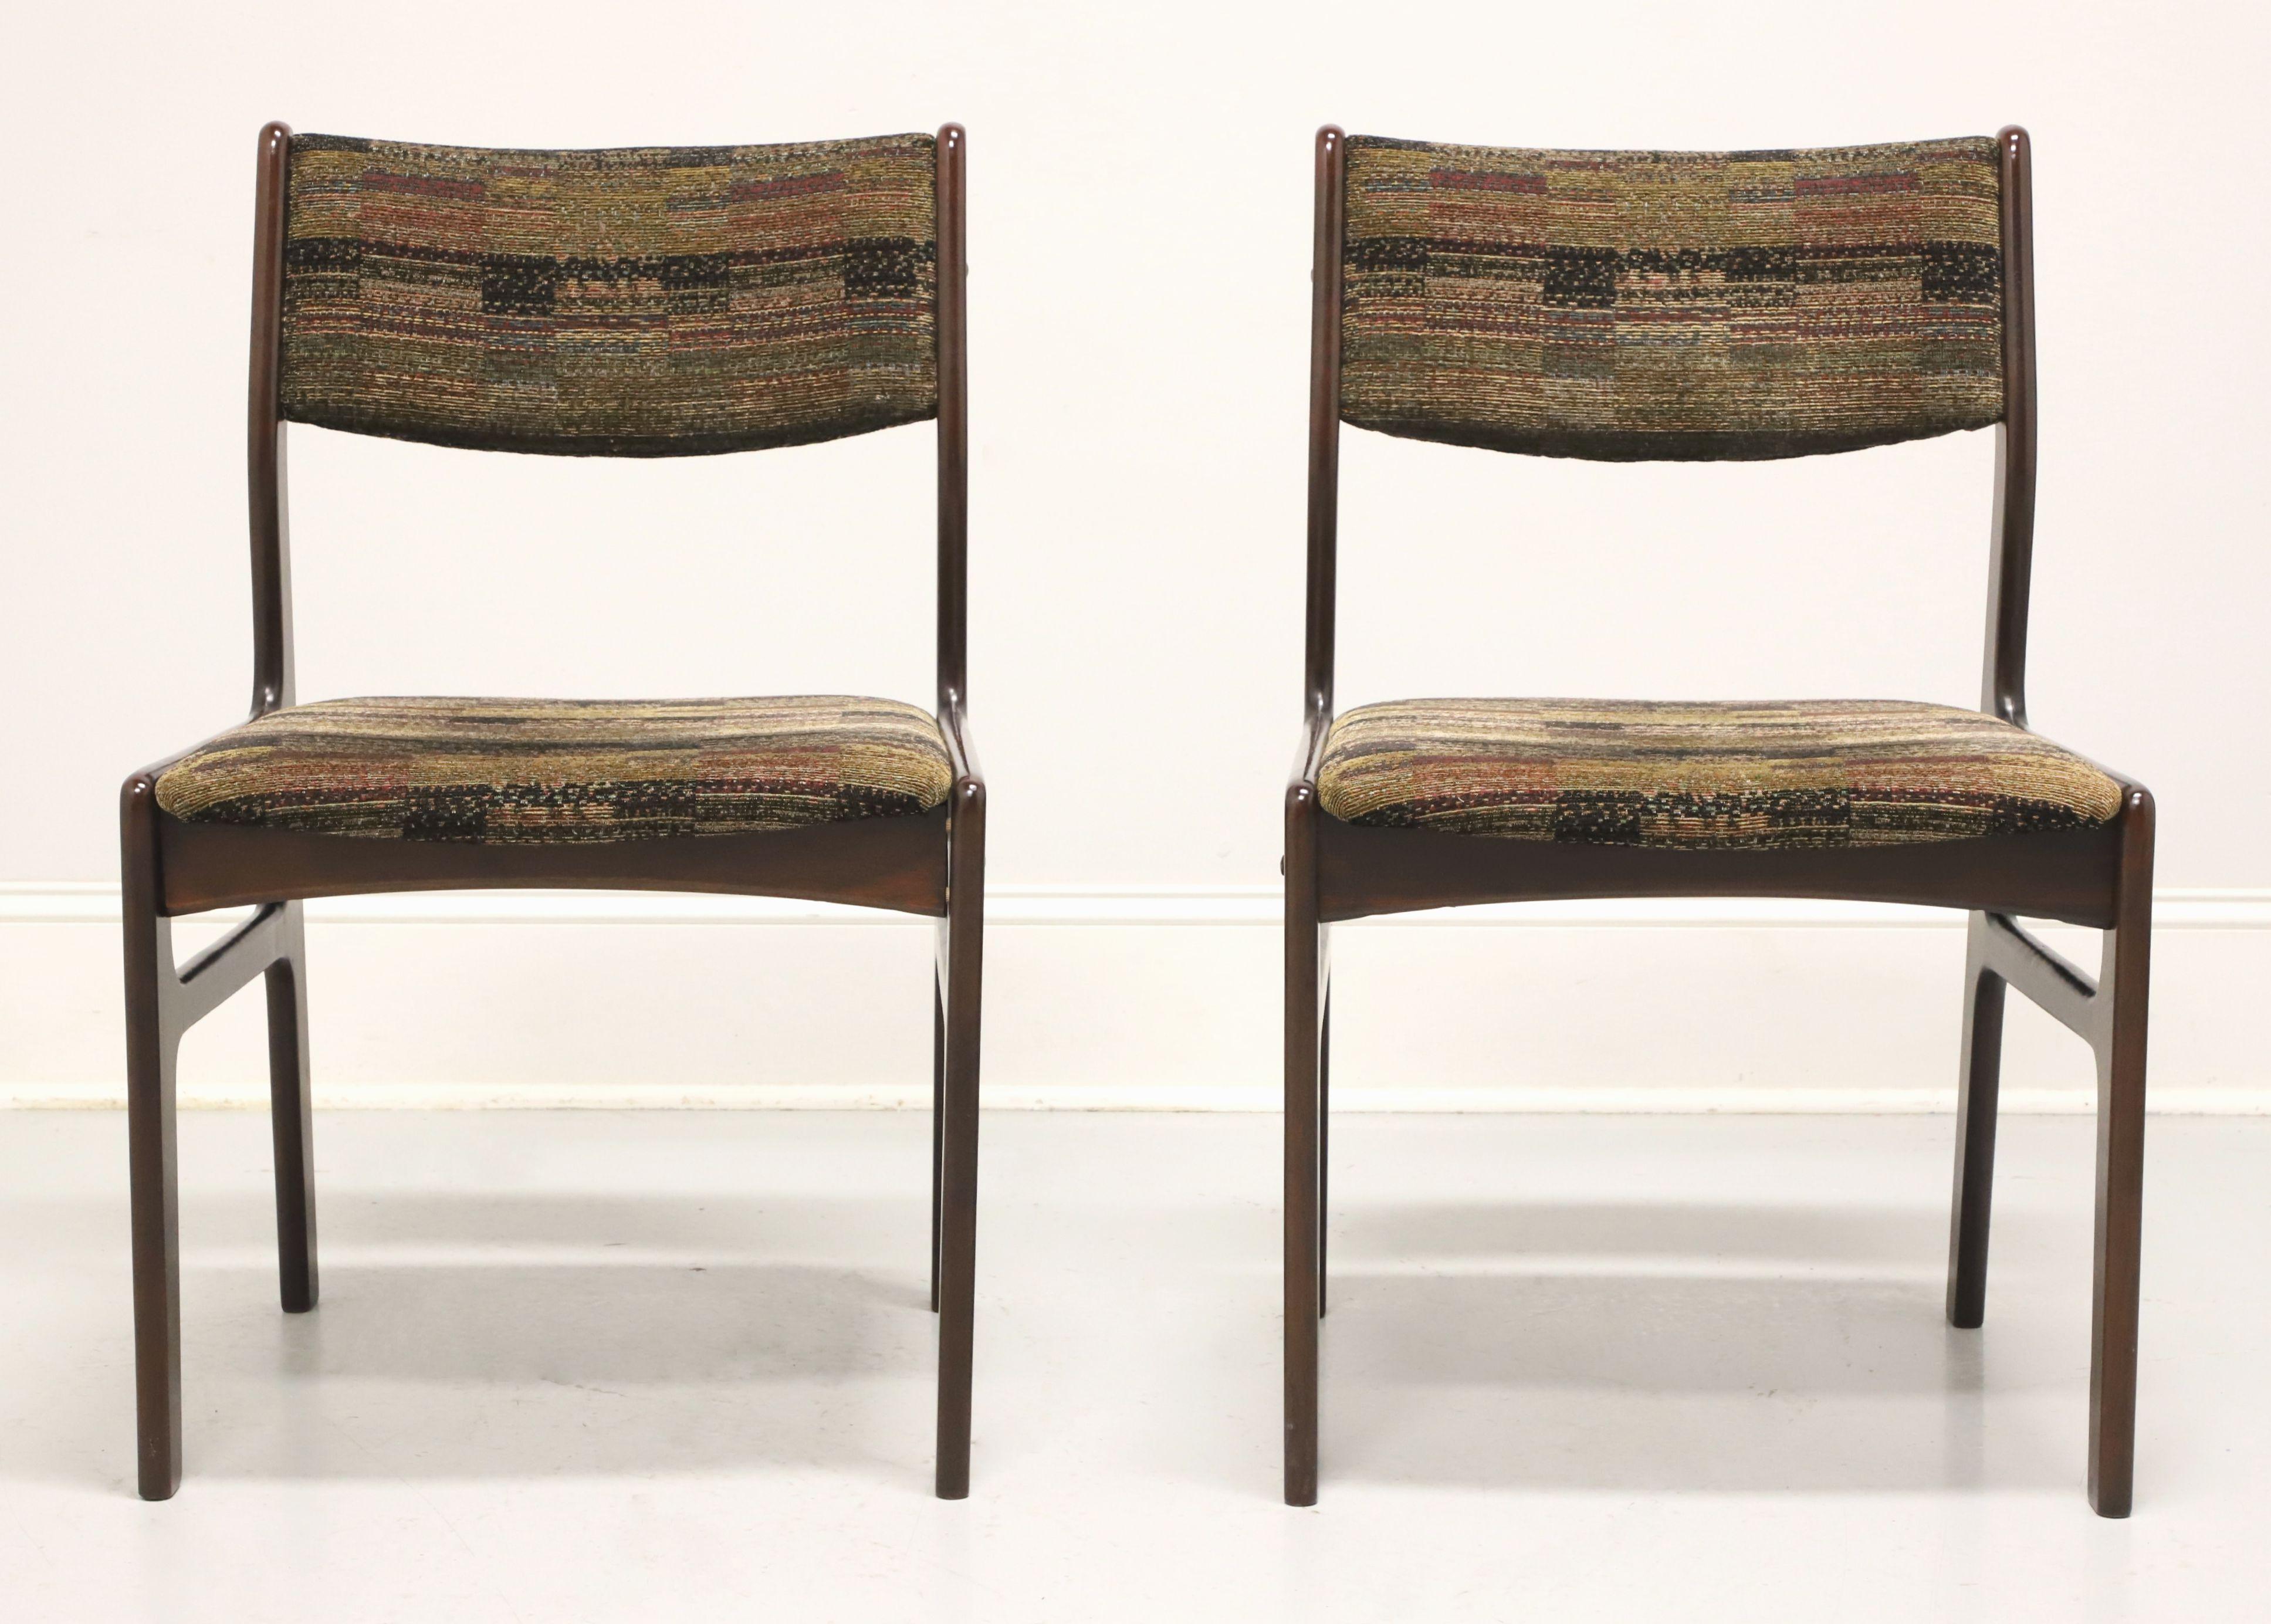 Scandinave moderne DYRLUND Mid 20th Century Rosewood Danish Modern Dining Side Chairs - Pair A en vente